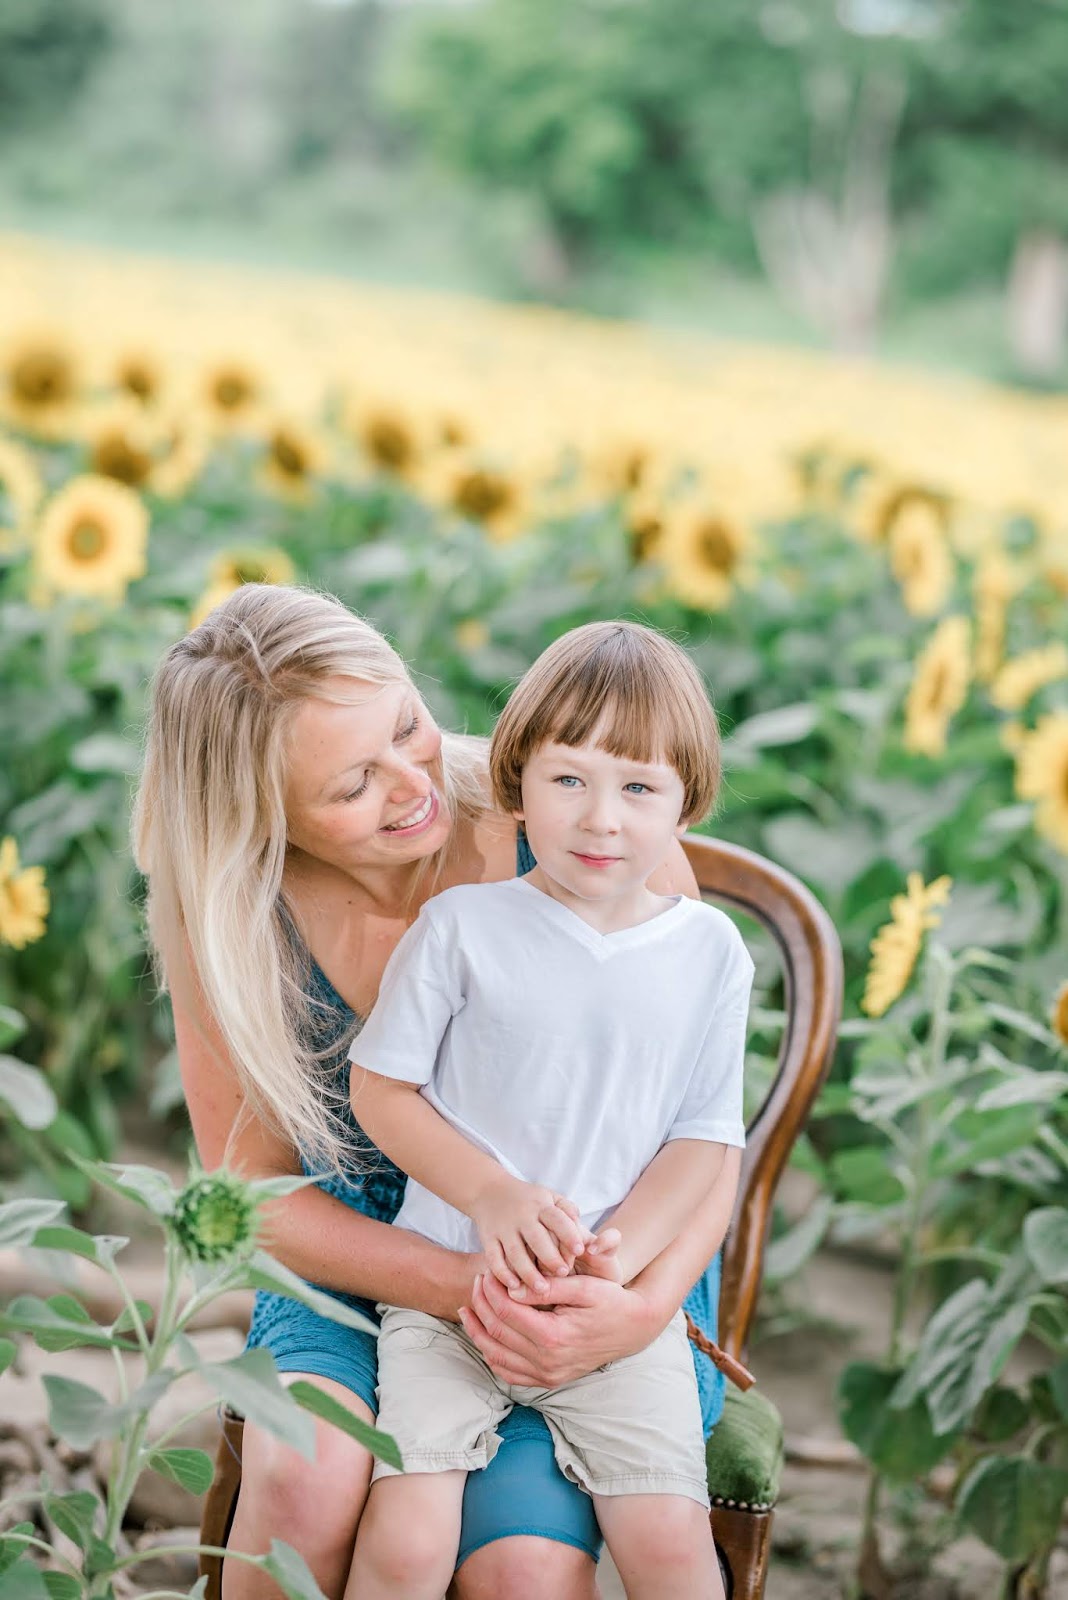 sunflower mini sessions in caledon 2019 | The Final Touch Photography ...